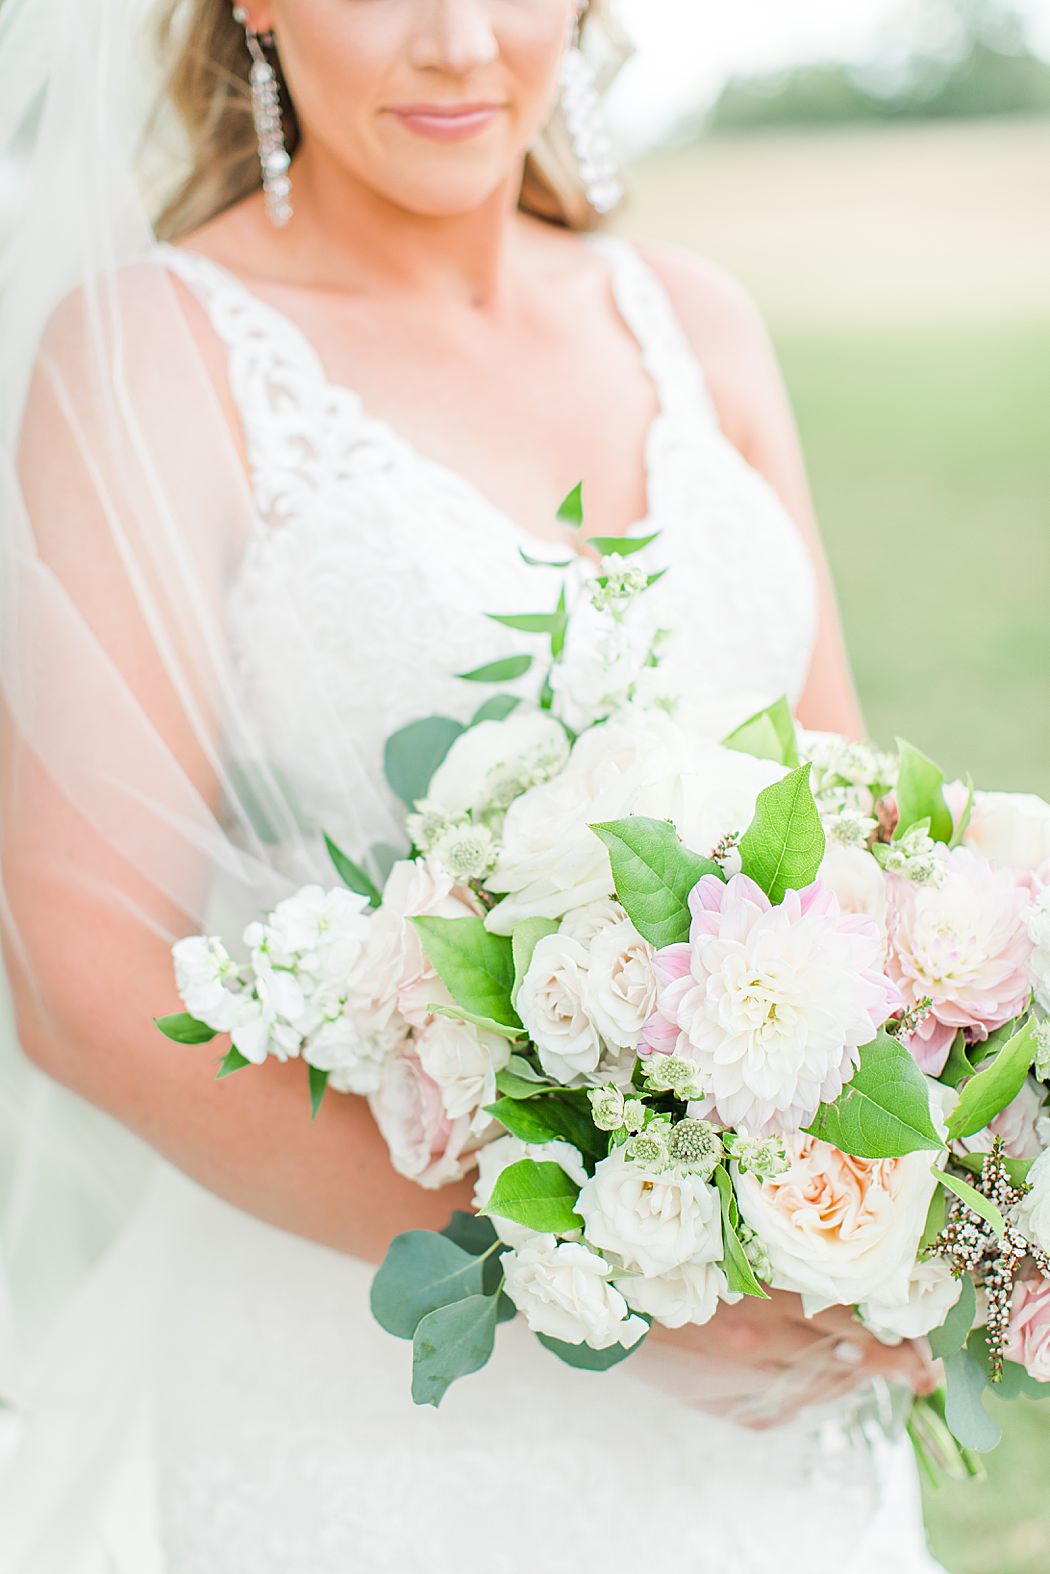 Summer Wedding at The Lodge at Country Inn Cottages in Fredericksburg Texas by Allison Jeffers Photography 0038